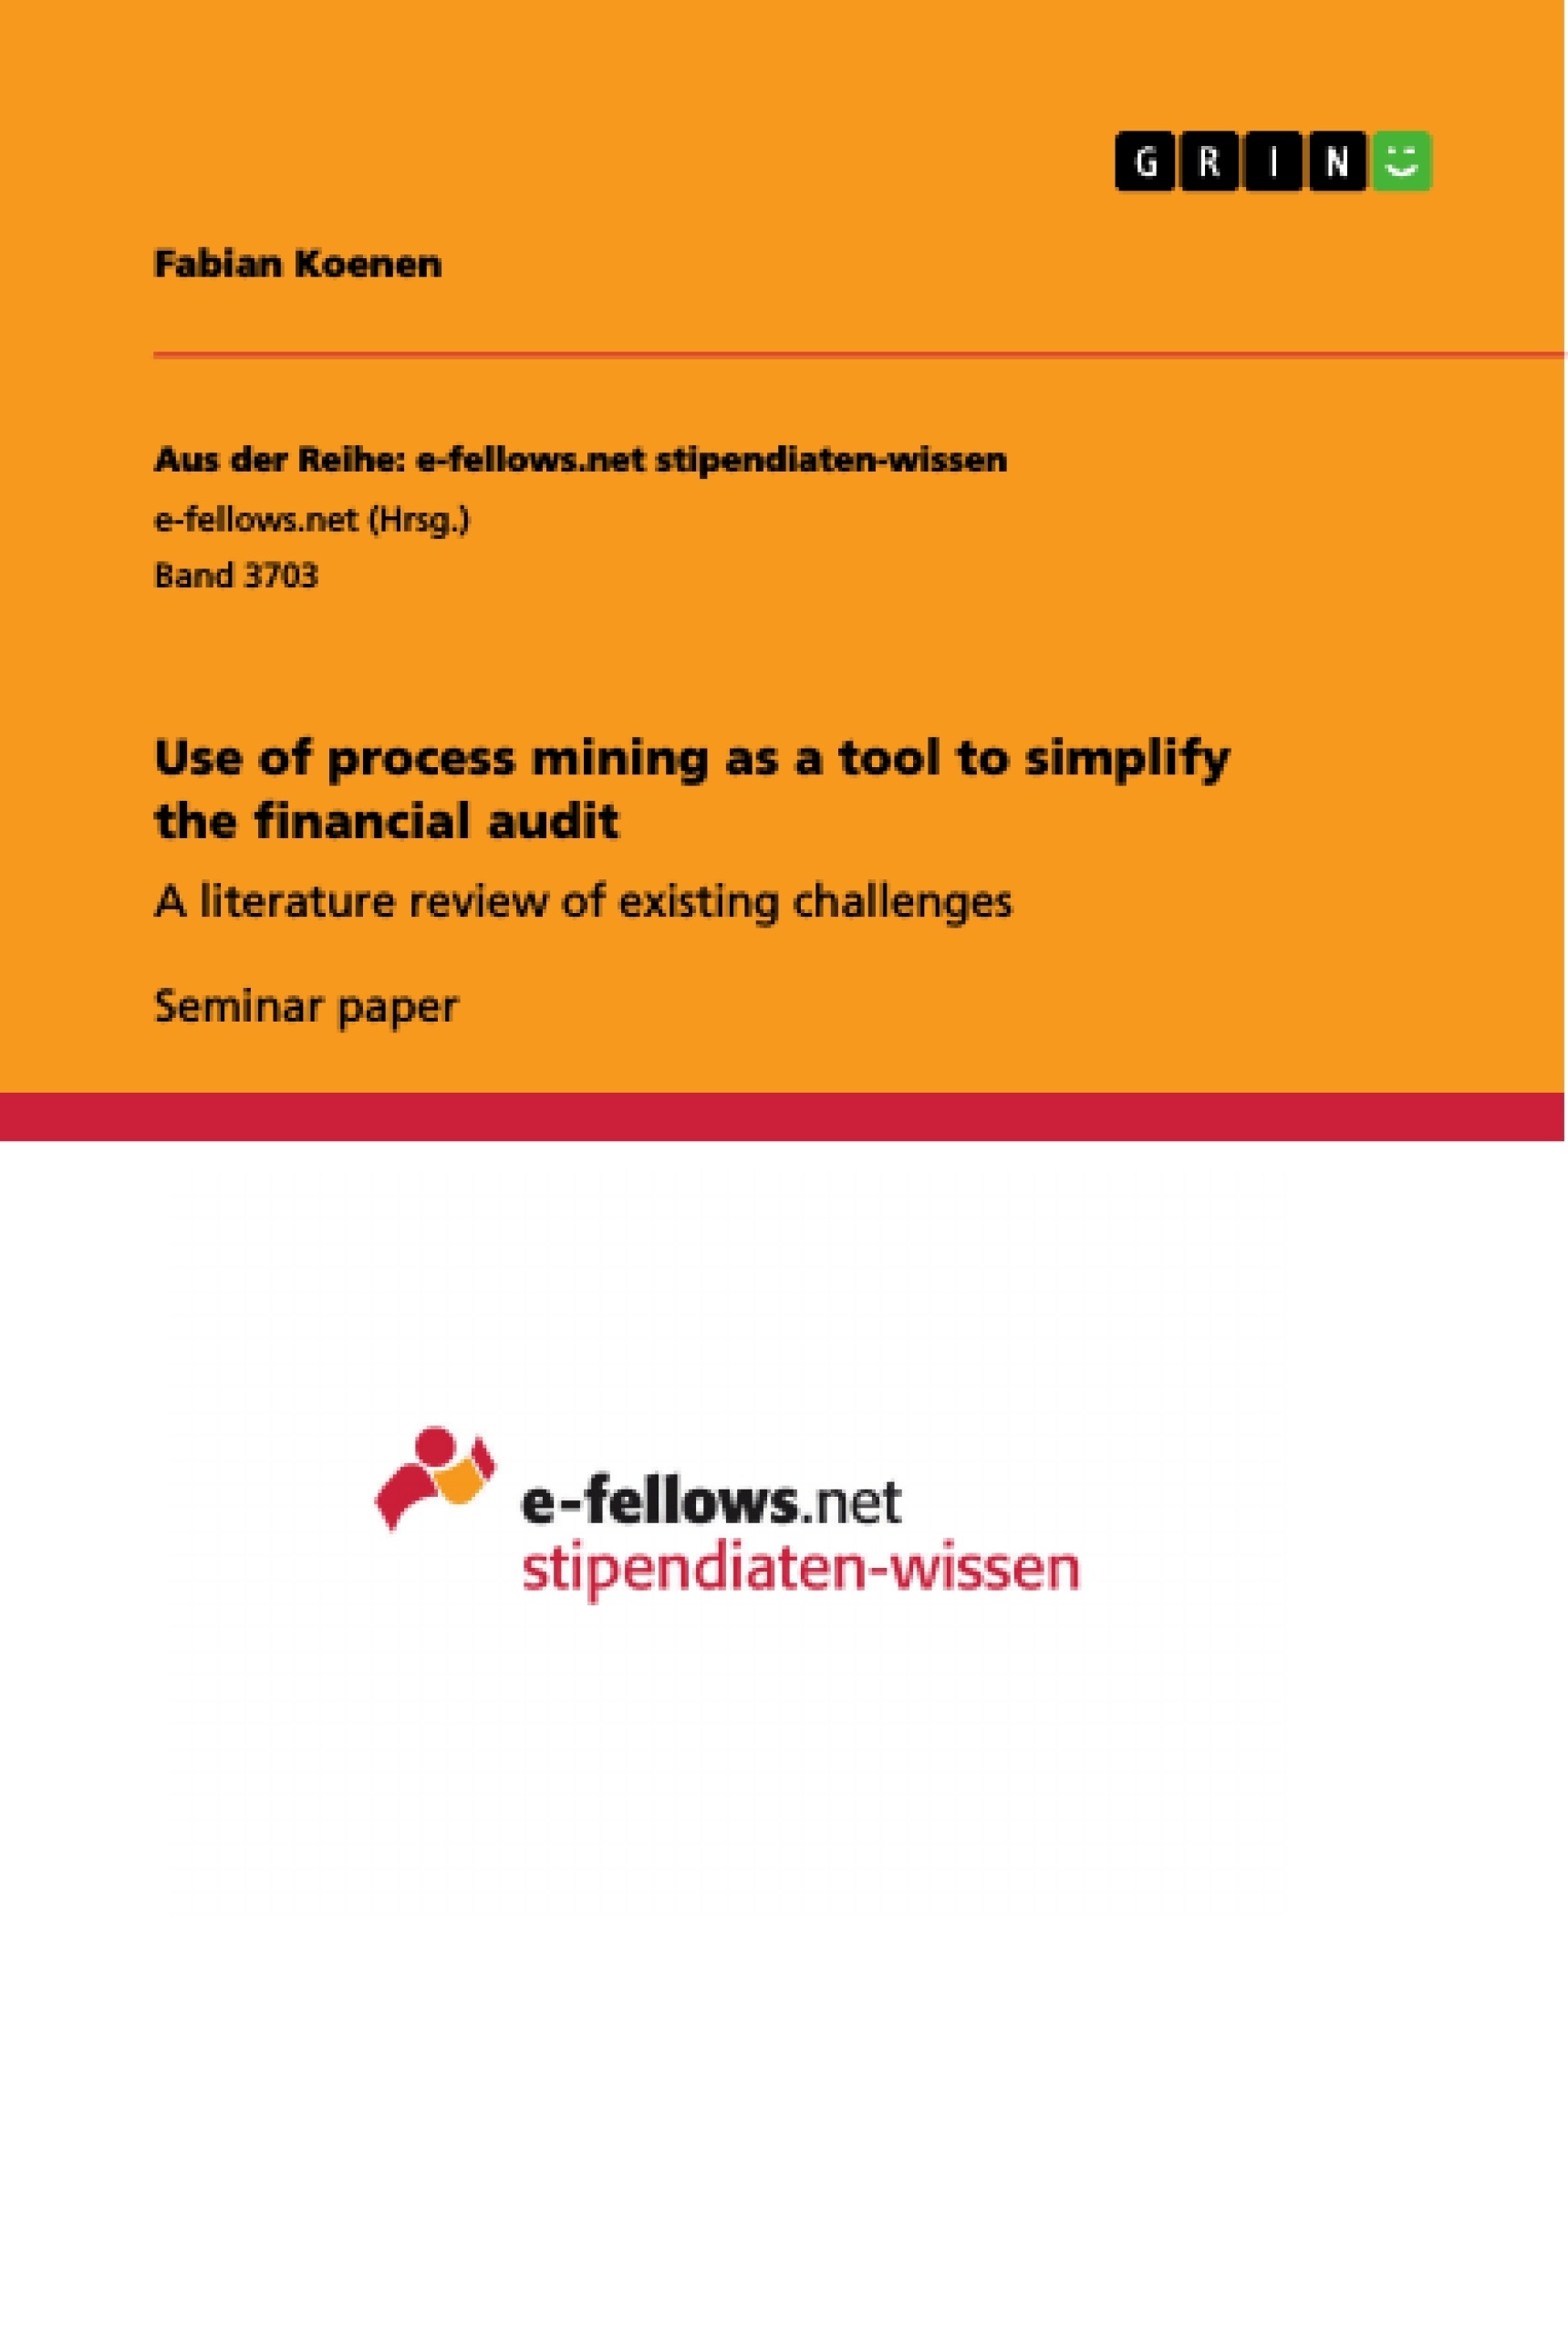 Titre: Use of process mining as a tool to simplify the financial audit